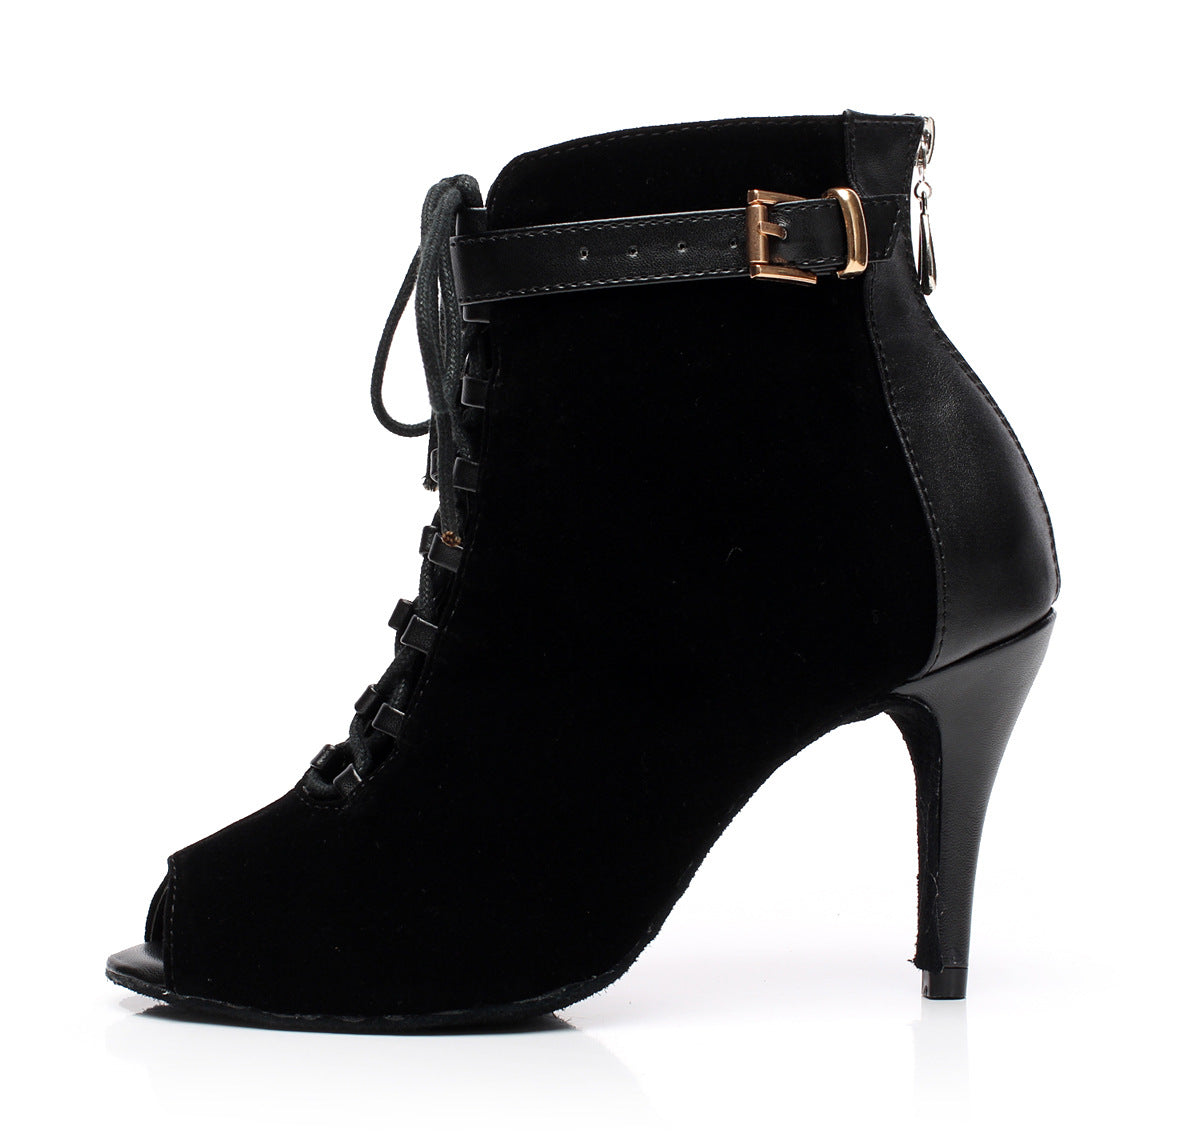 black suede and leather belt buckle strap up heels